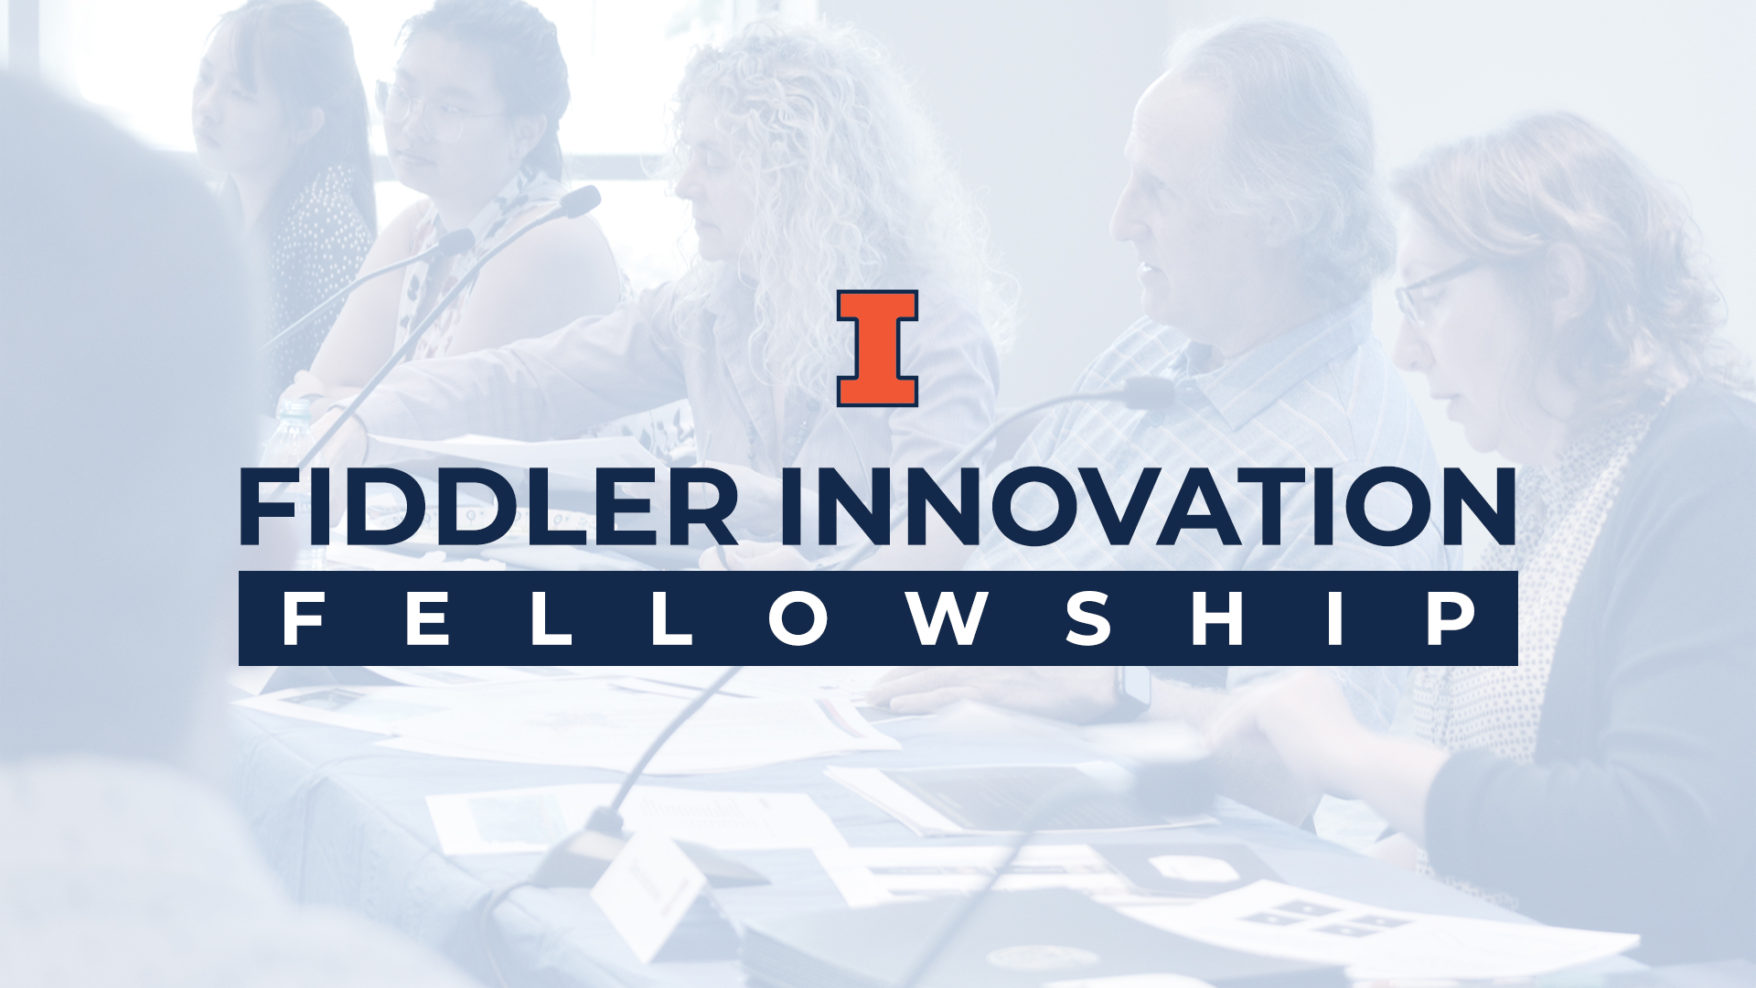 Greyed out image of a five person panel, with the text 'Fiddler Innovation Fellowship' with Illinois Block I logo